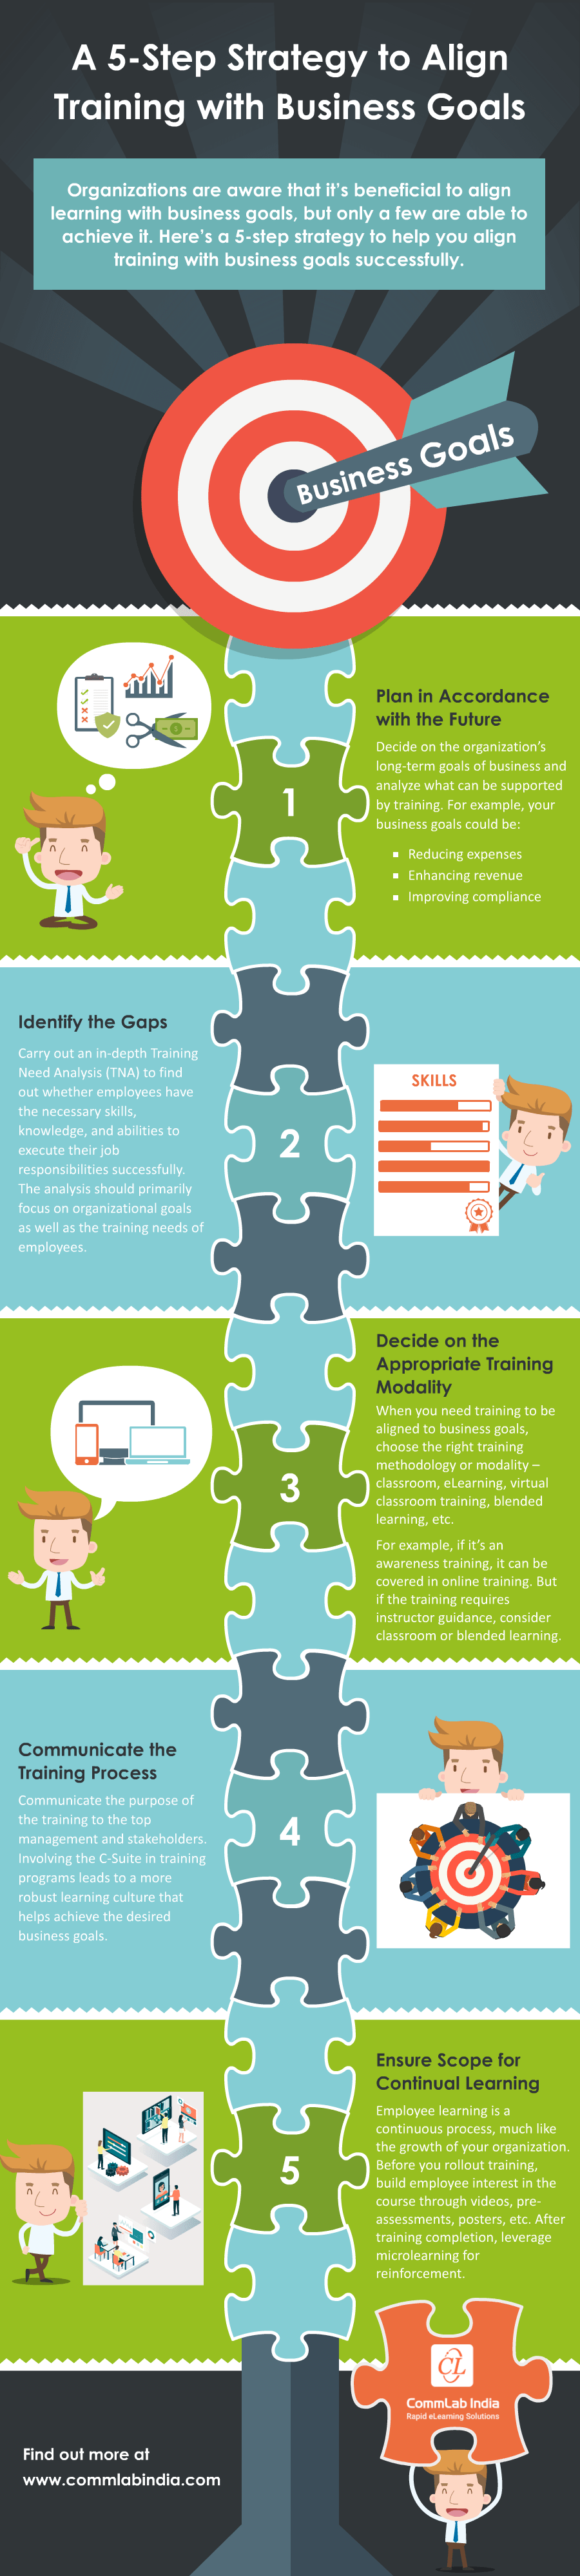 A 5-Step Strategy to Align Training with Business Goals [Infographic]